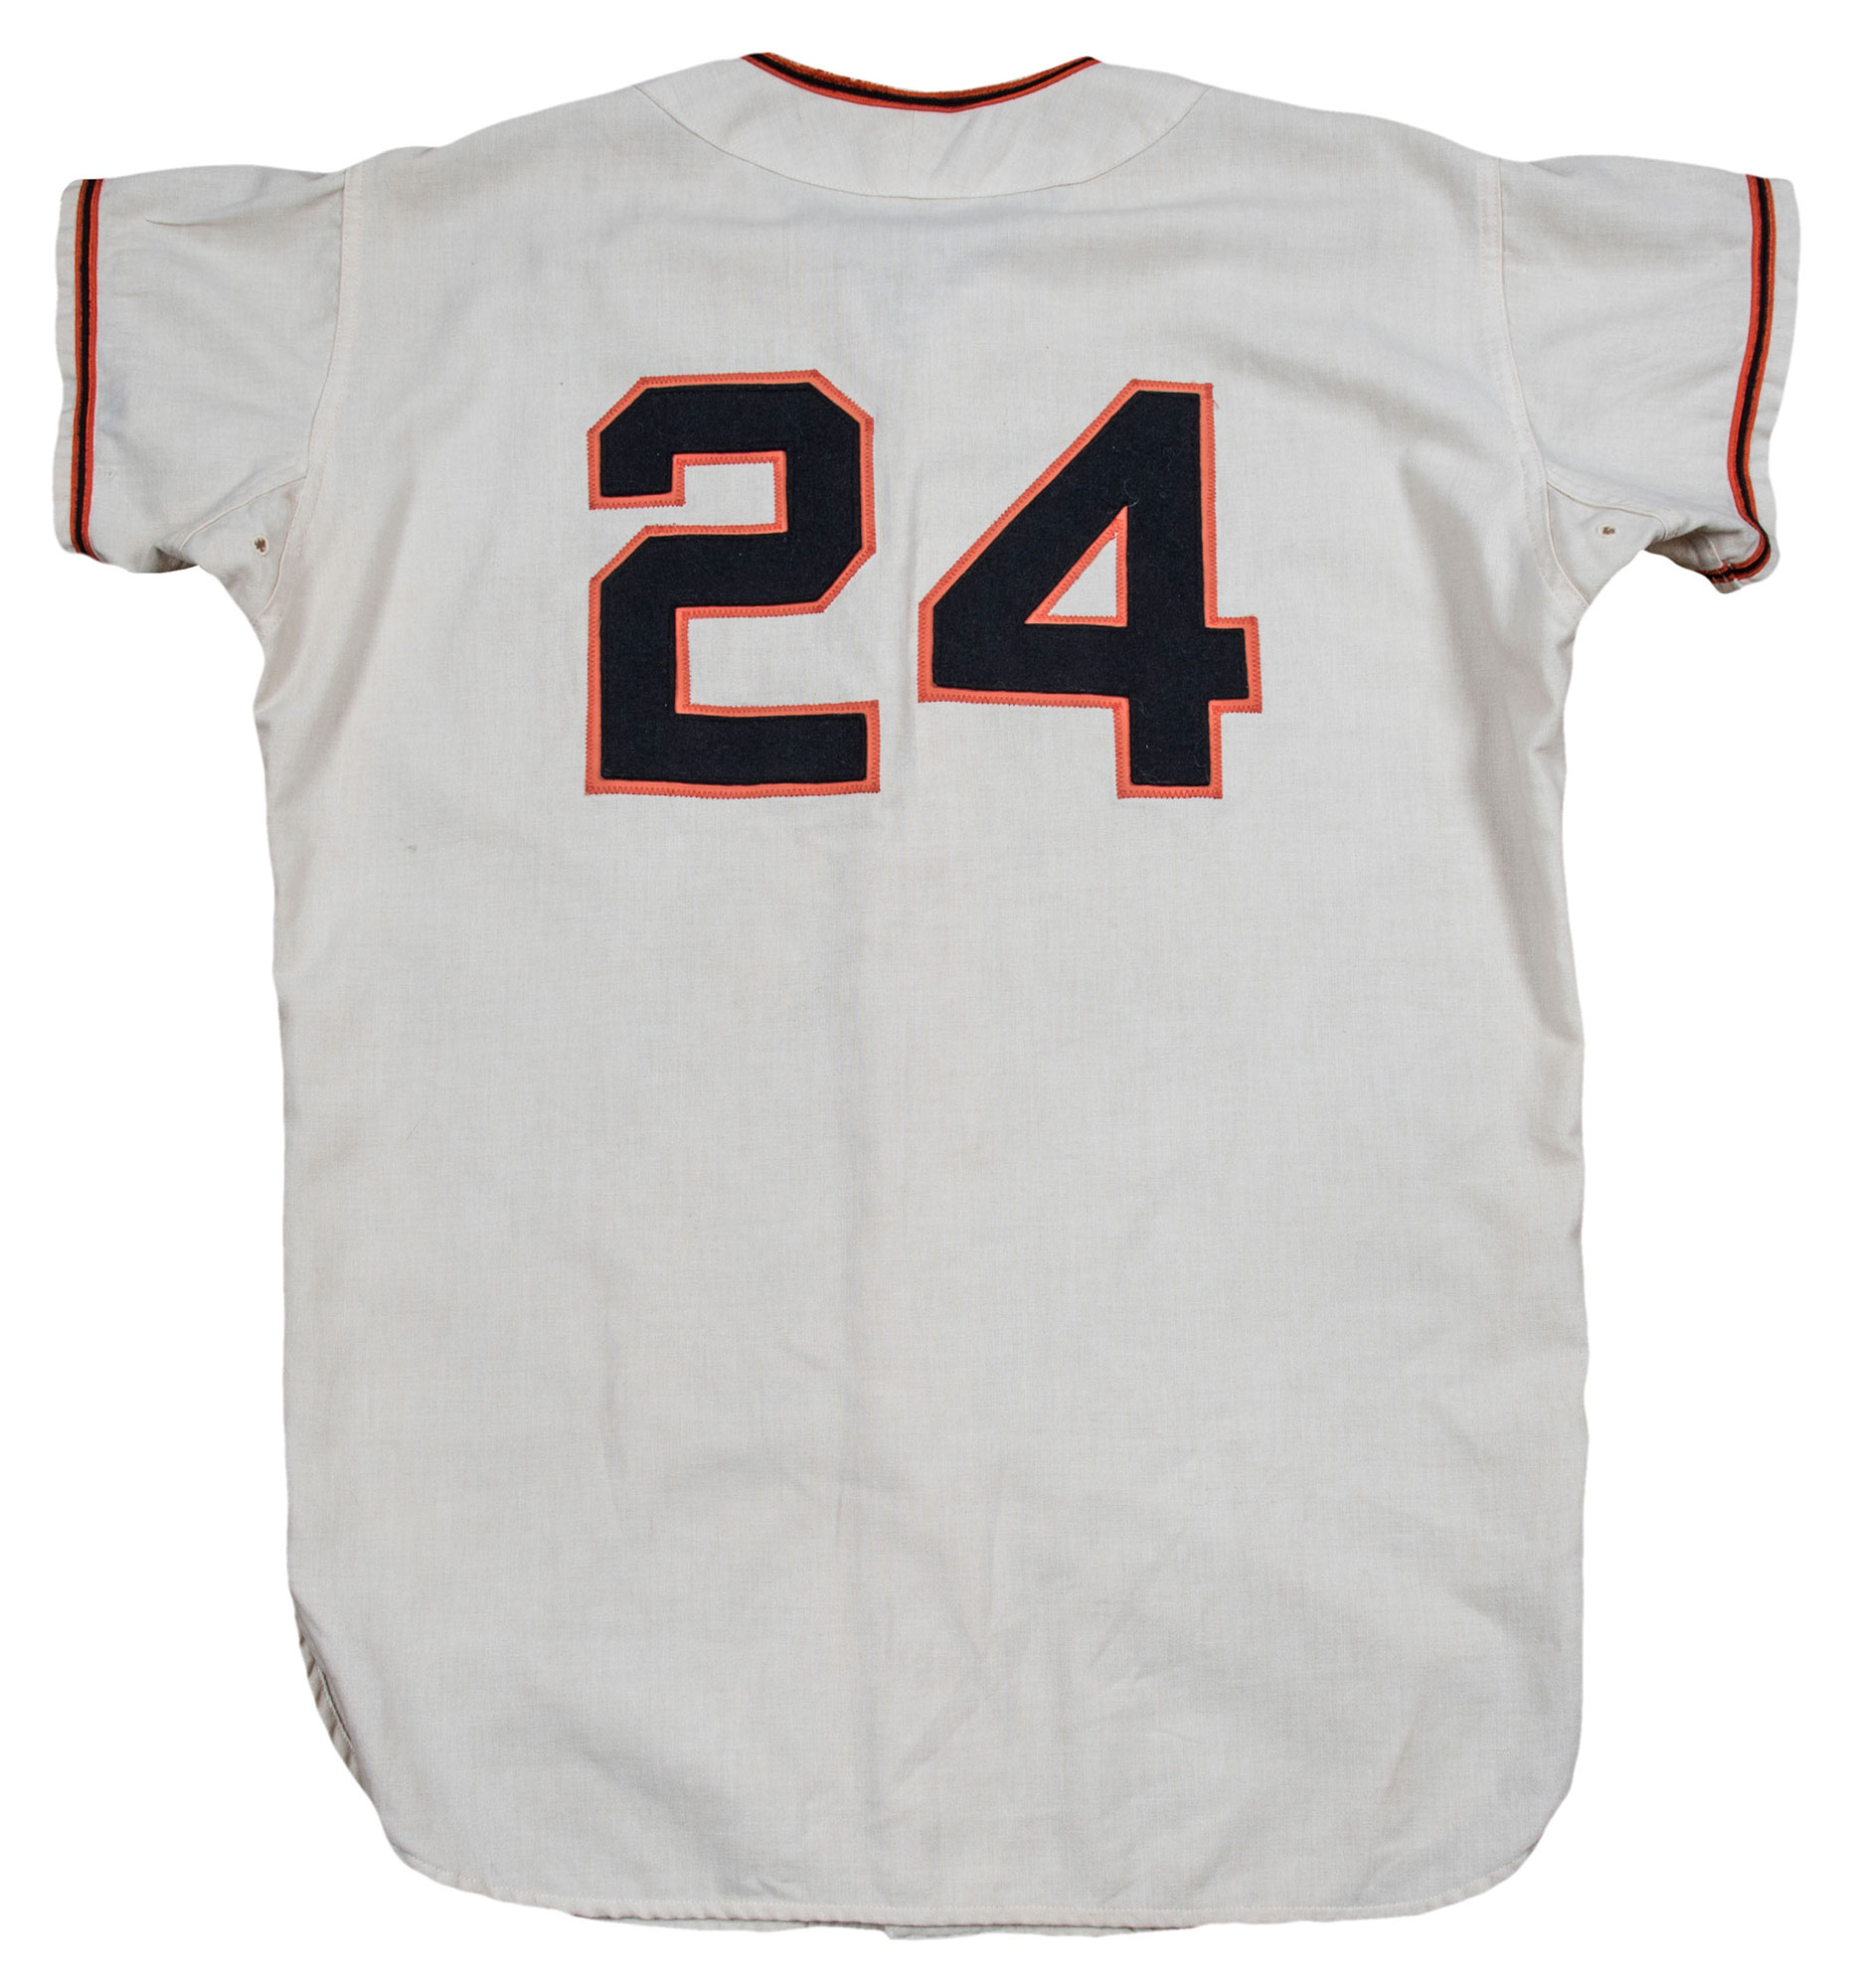 1965 Willie Mays Game Worn San Francisco Giants Jersey, MEARS